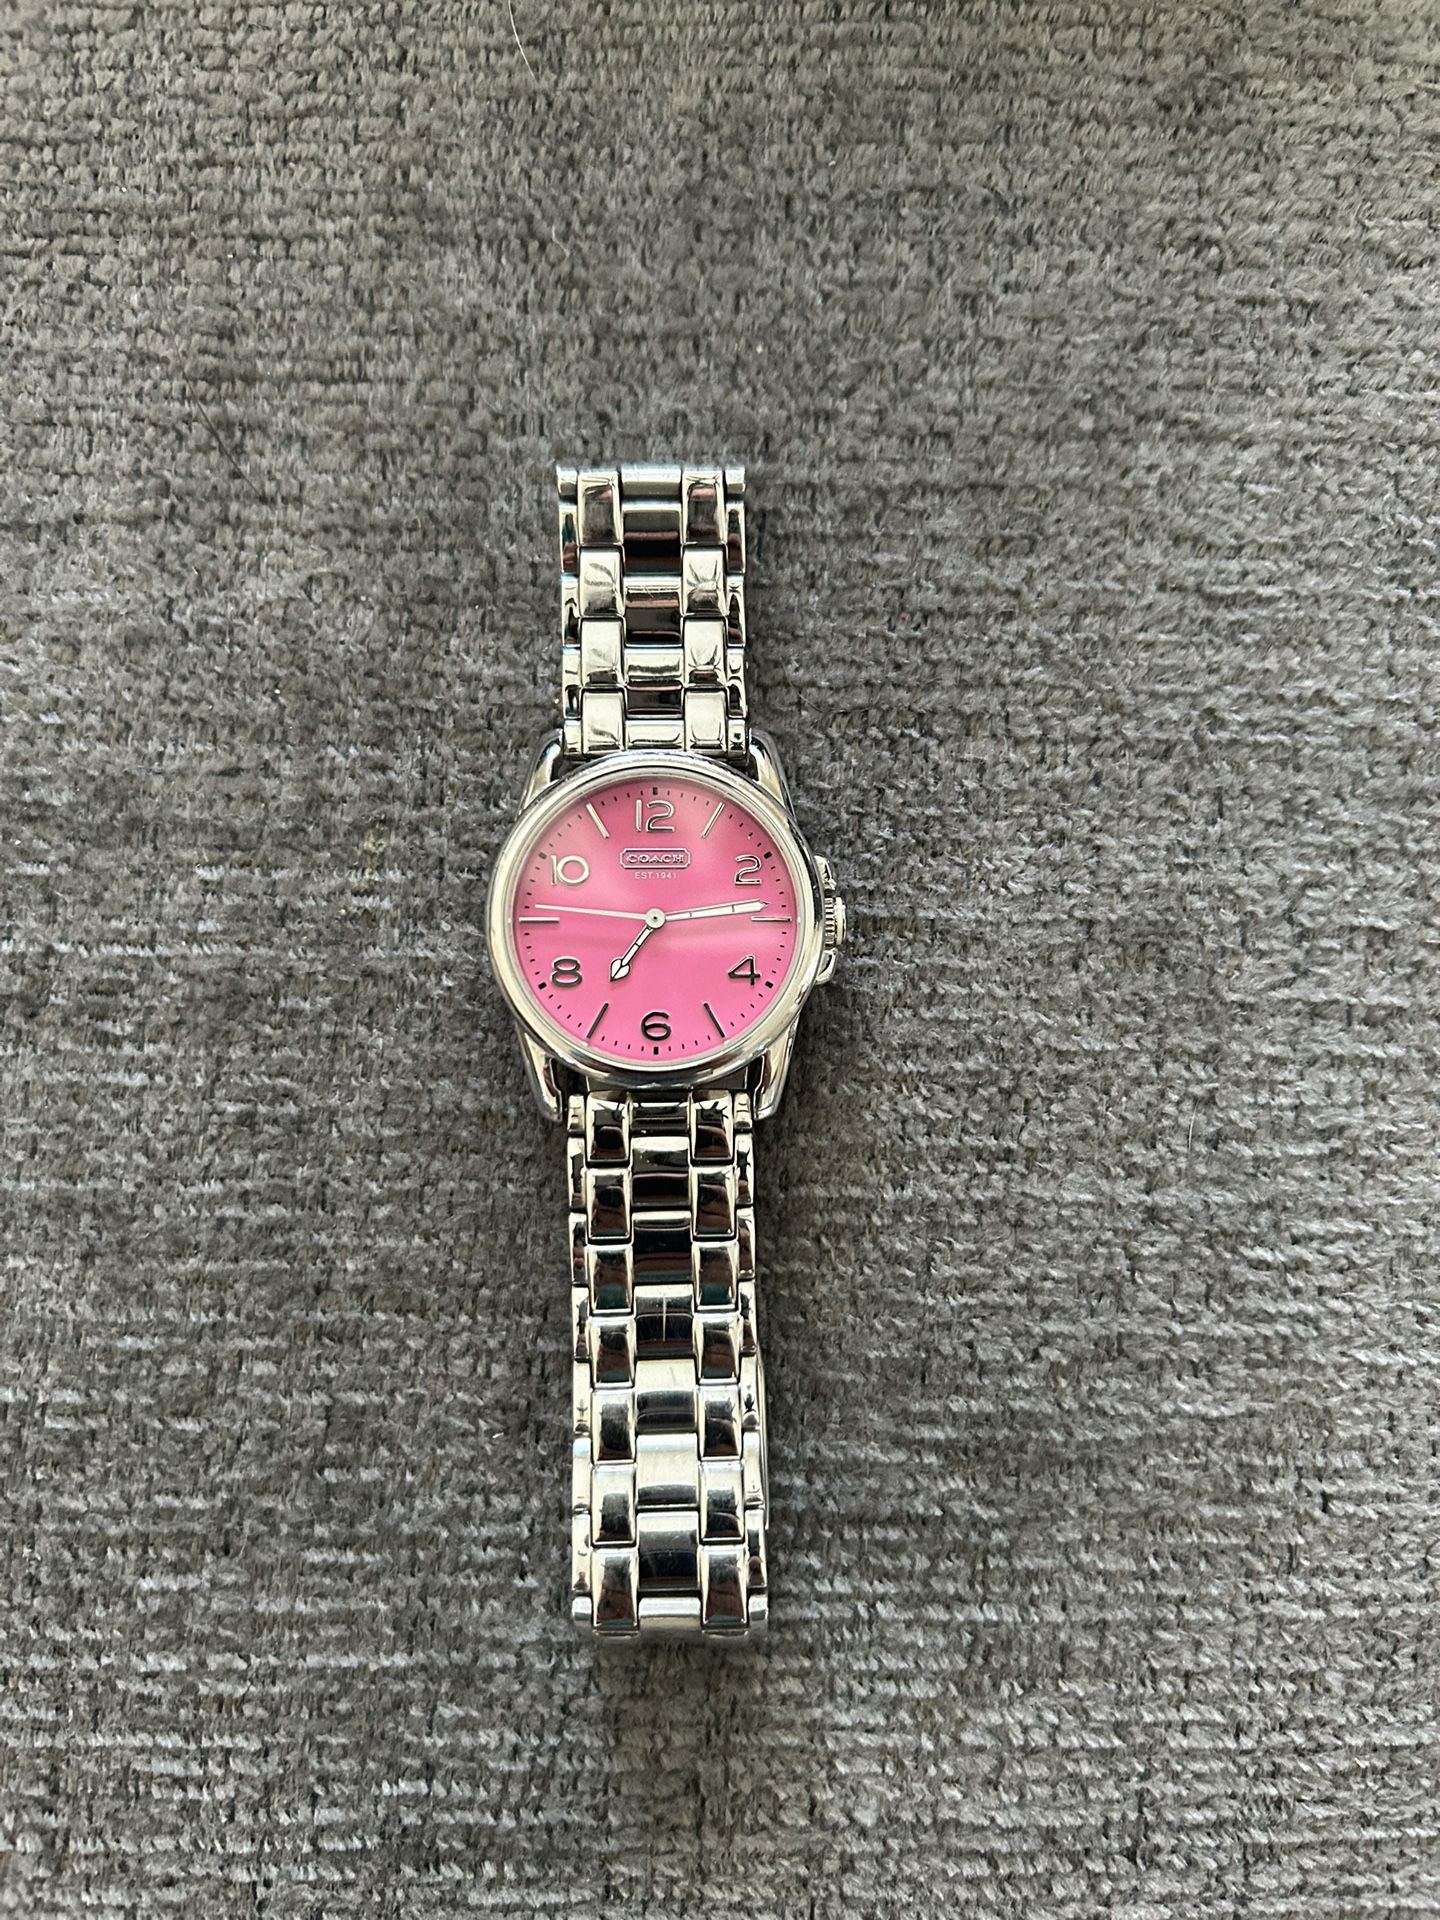 Hot Pink Coach Watch - Authentic